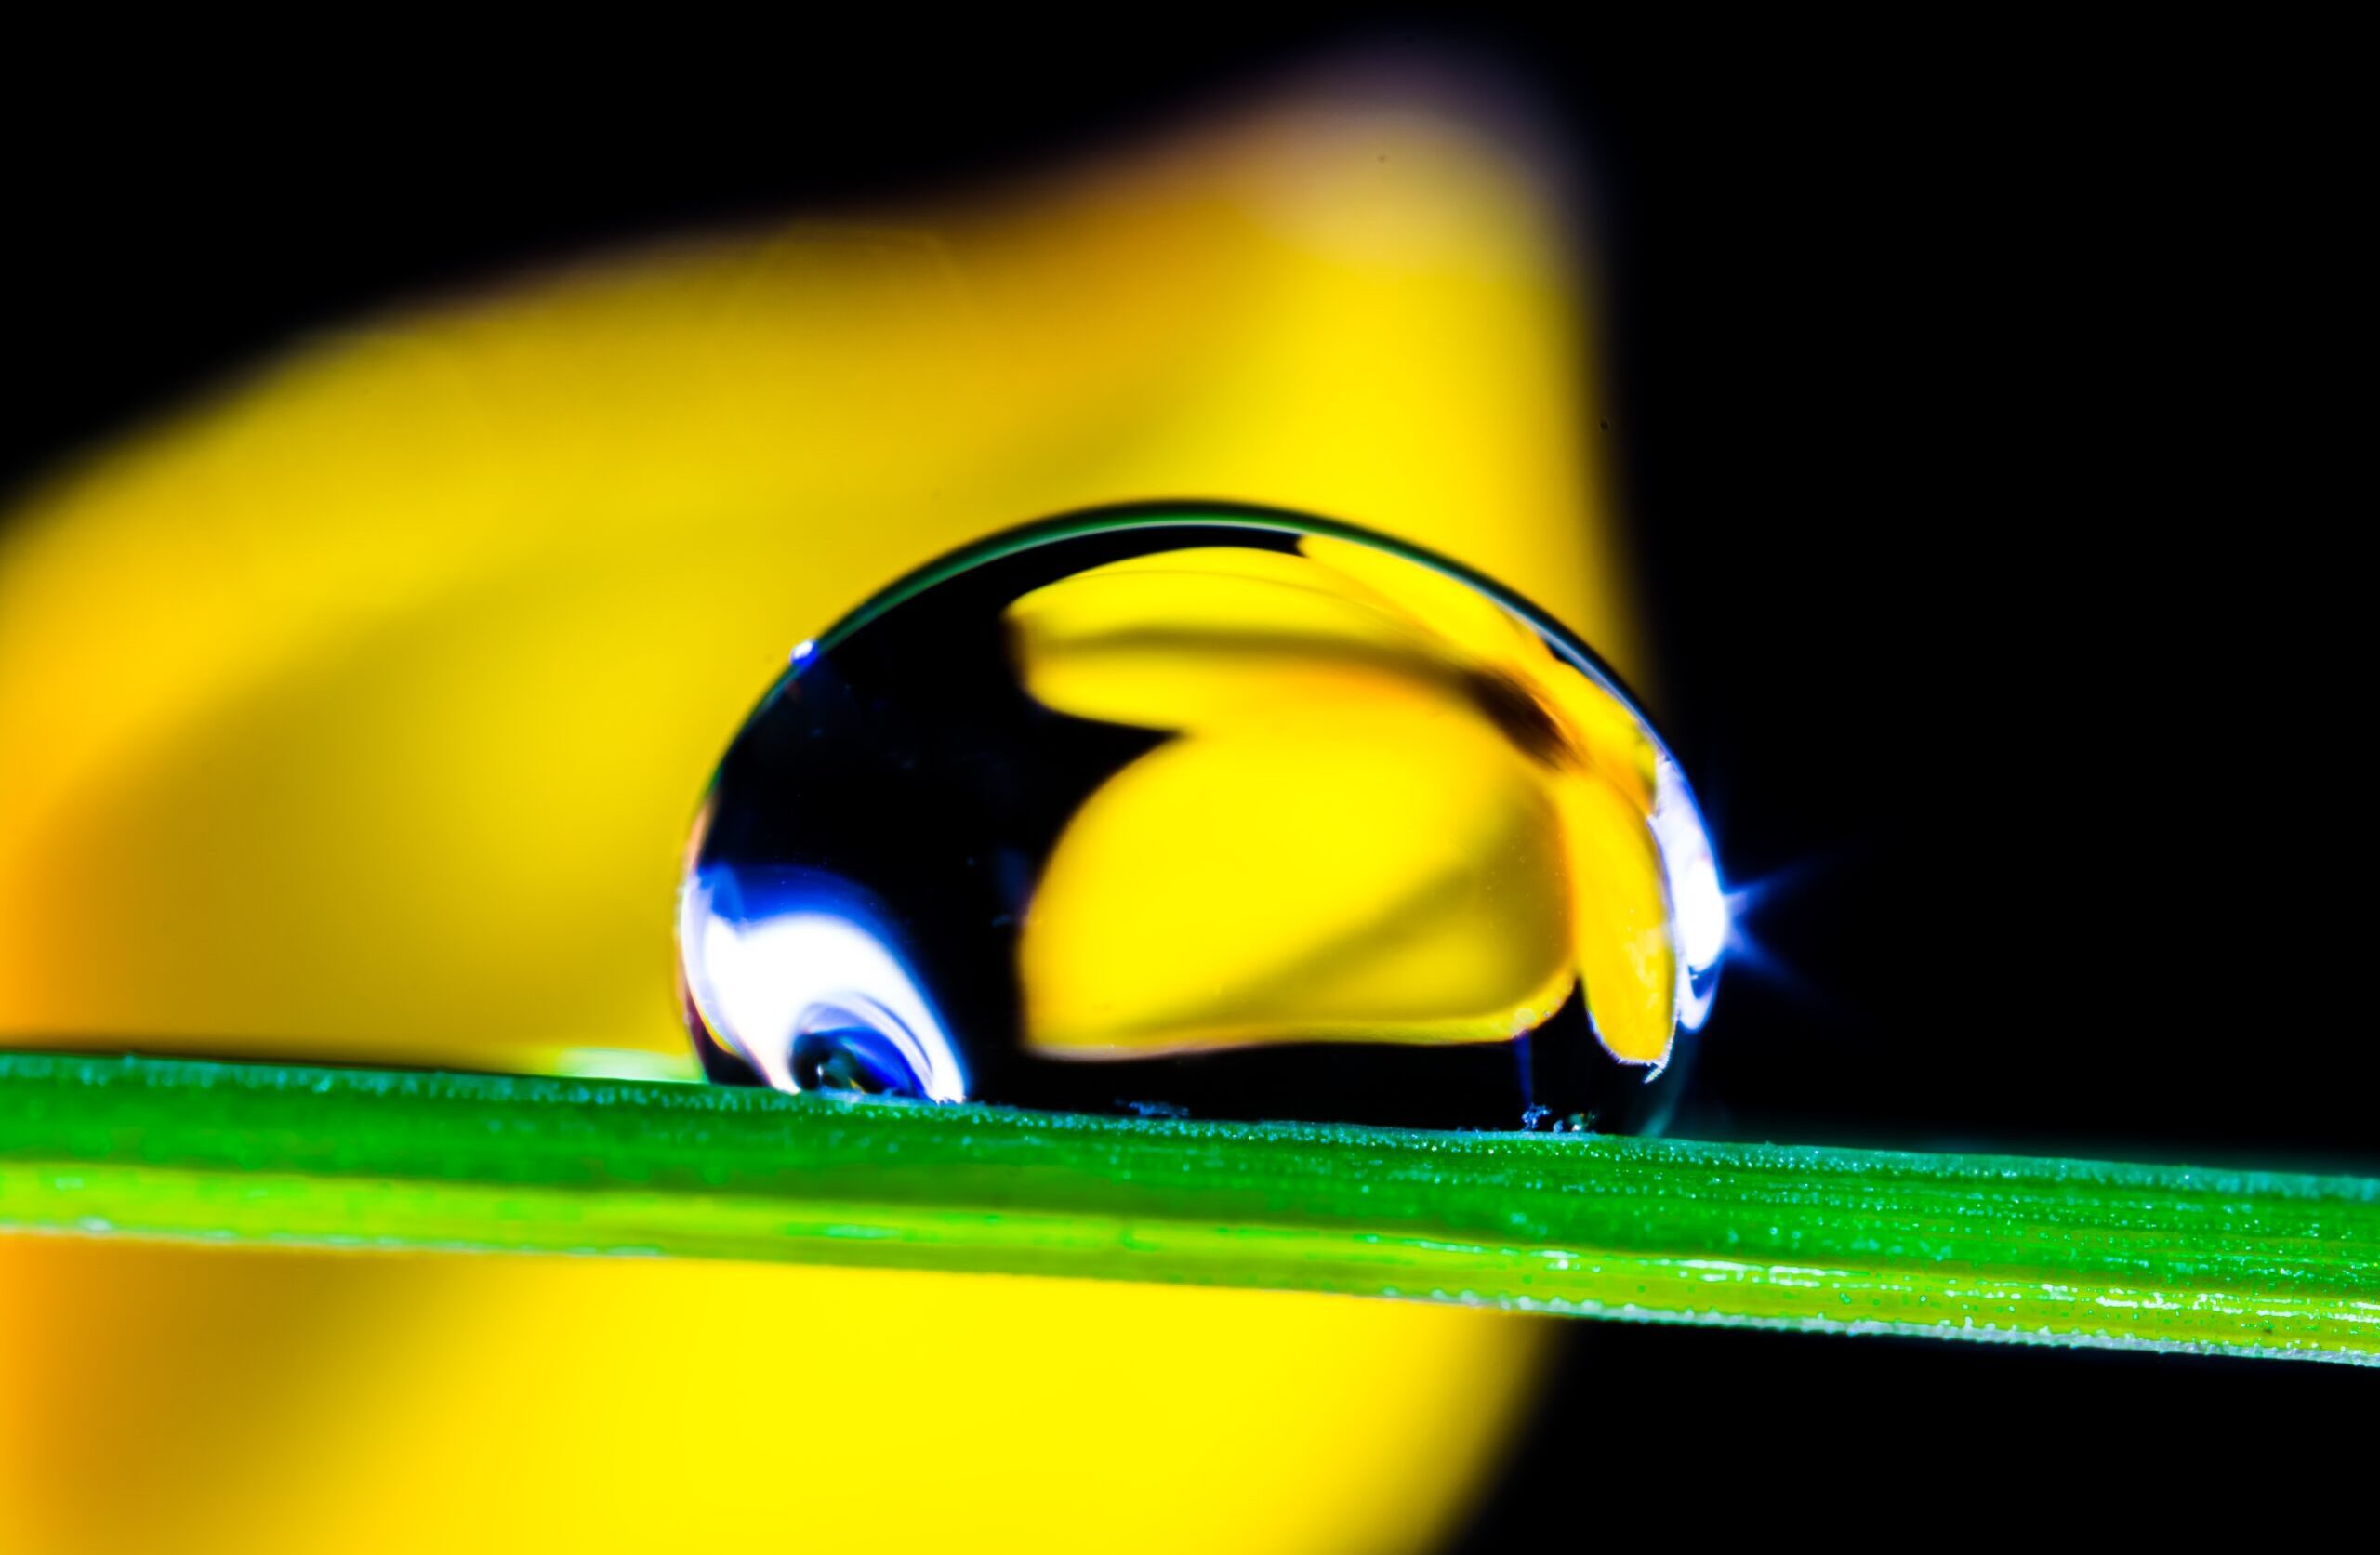 waterdrop 361097 scaled